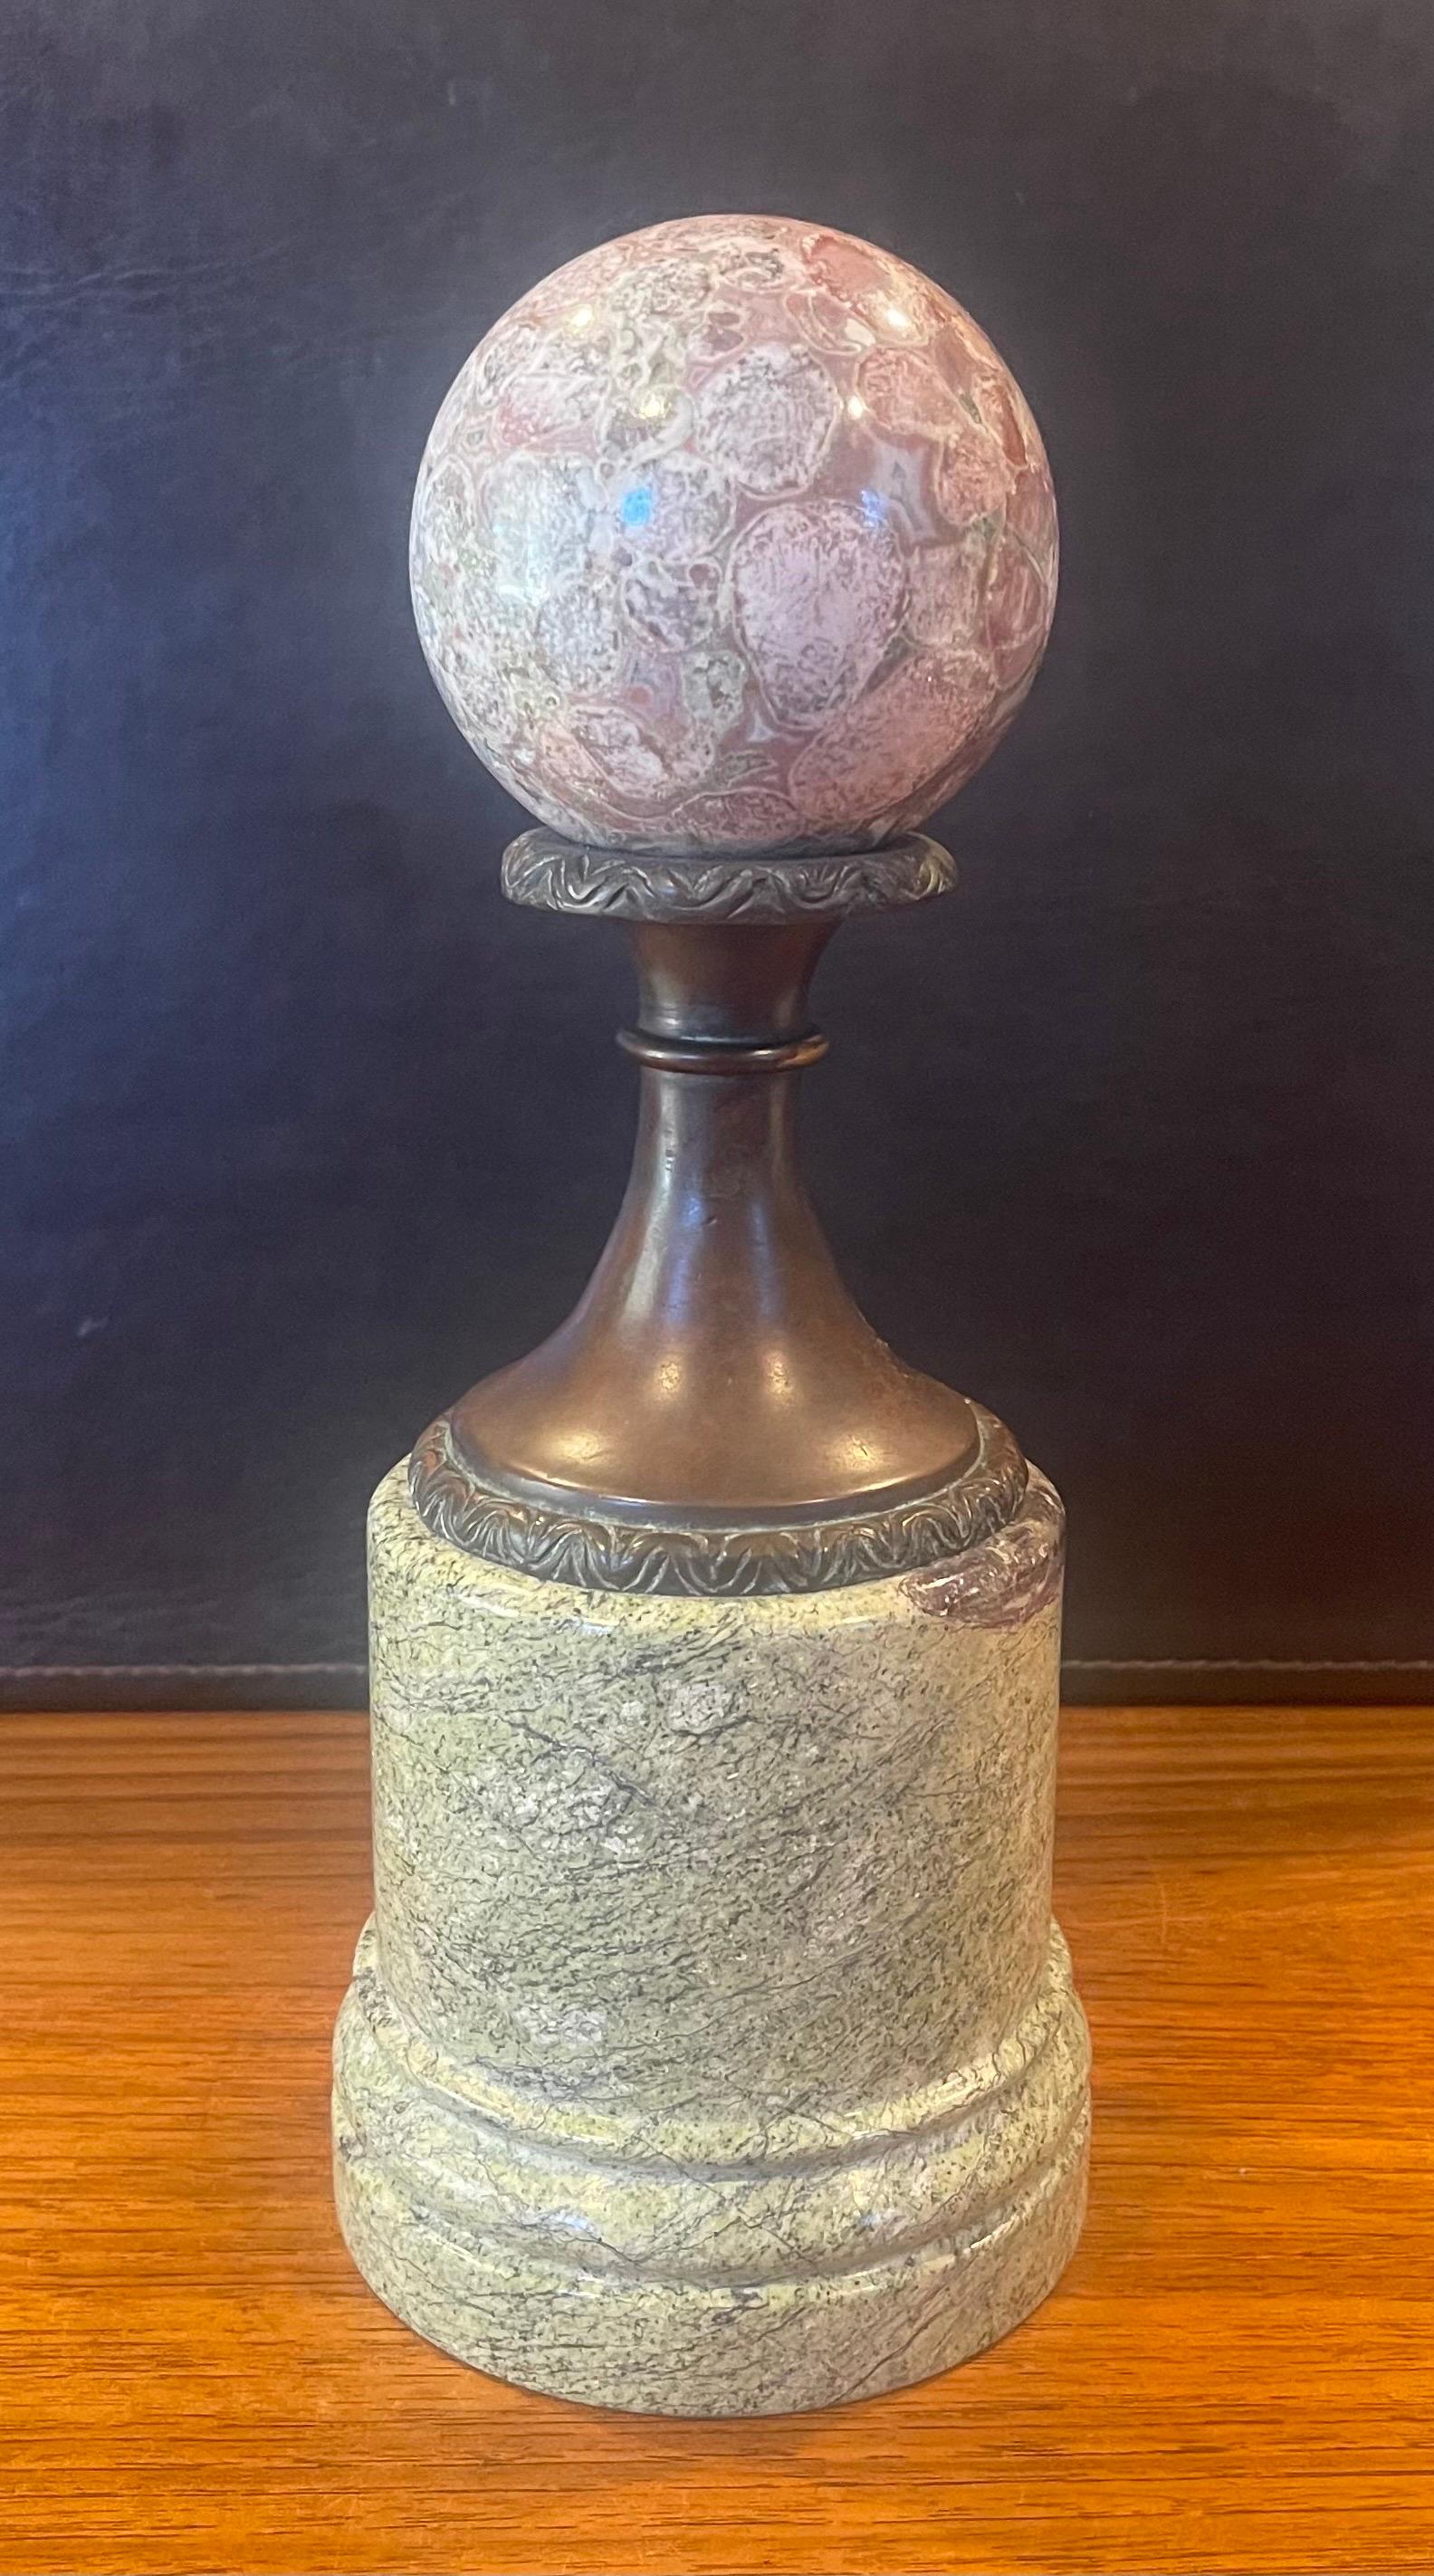 Beautiful decorative marble sphere on bronze and marble base, circa 1990s. The piece is in very good condition with no chips or cracks; it has a nice polished finish with with white, red, grey and green veining and speckles. The sculpture measures